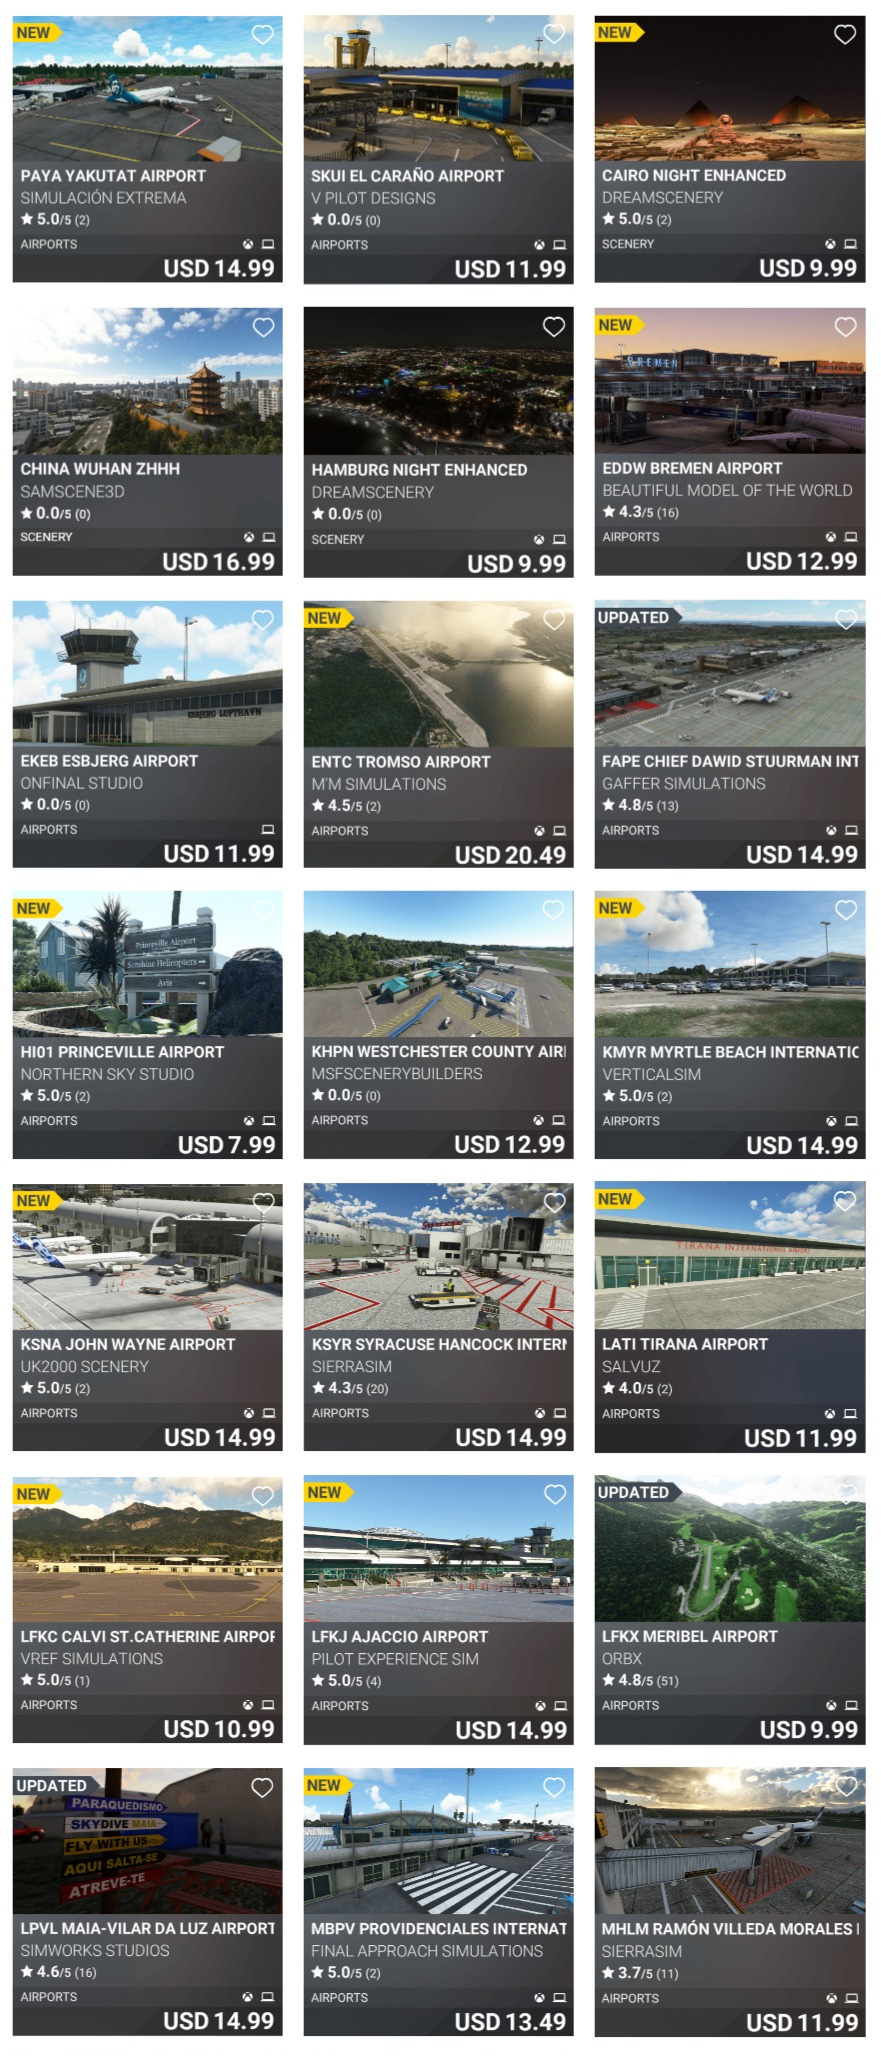 msfs marketplace update may 27 2022 airports scenery